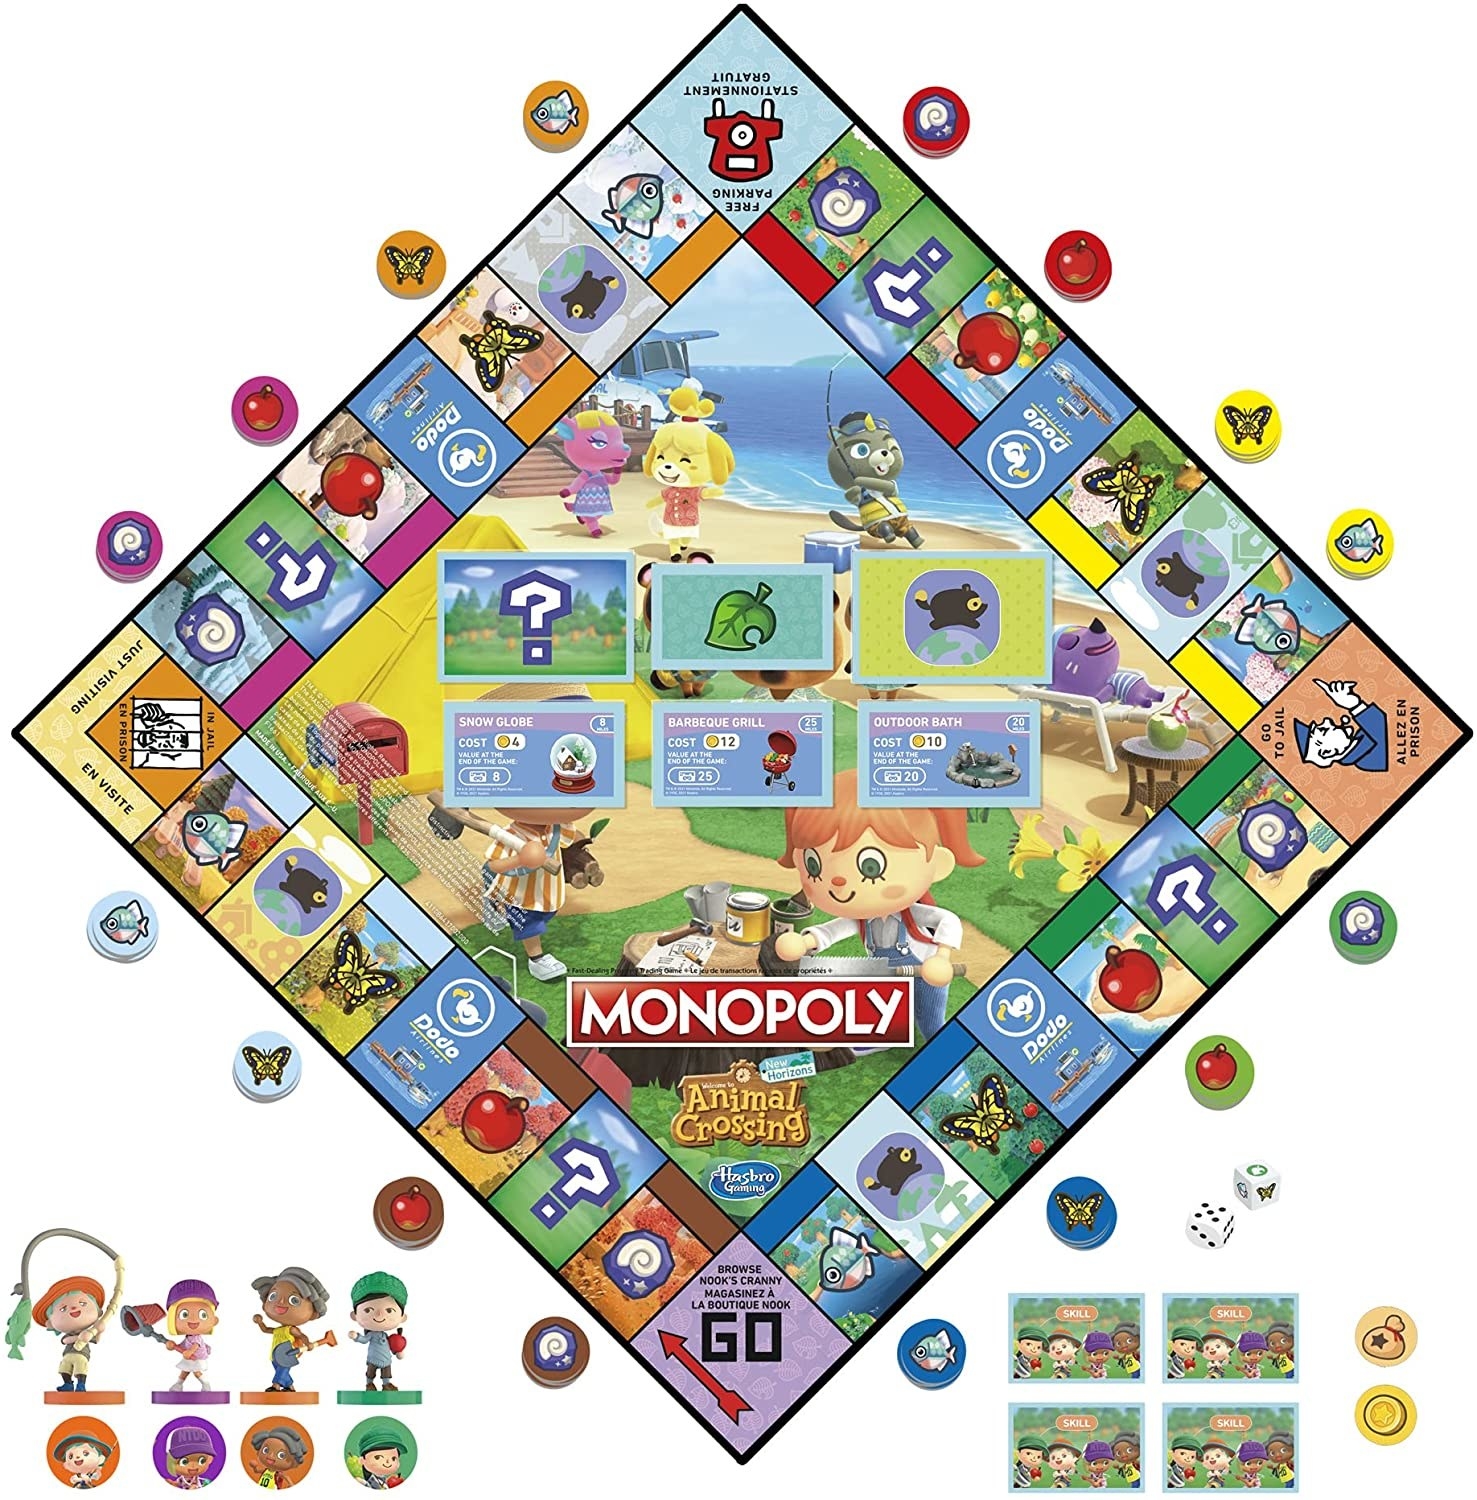 The Animal Crossing Monopoly board and all its pieces laid out